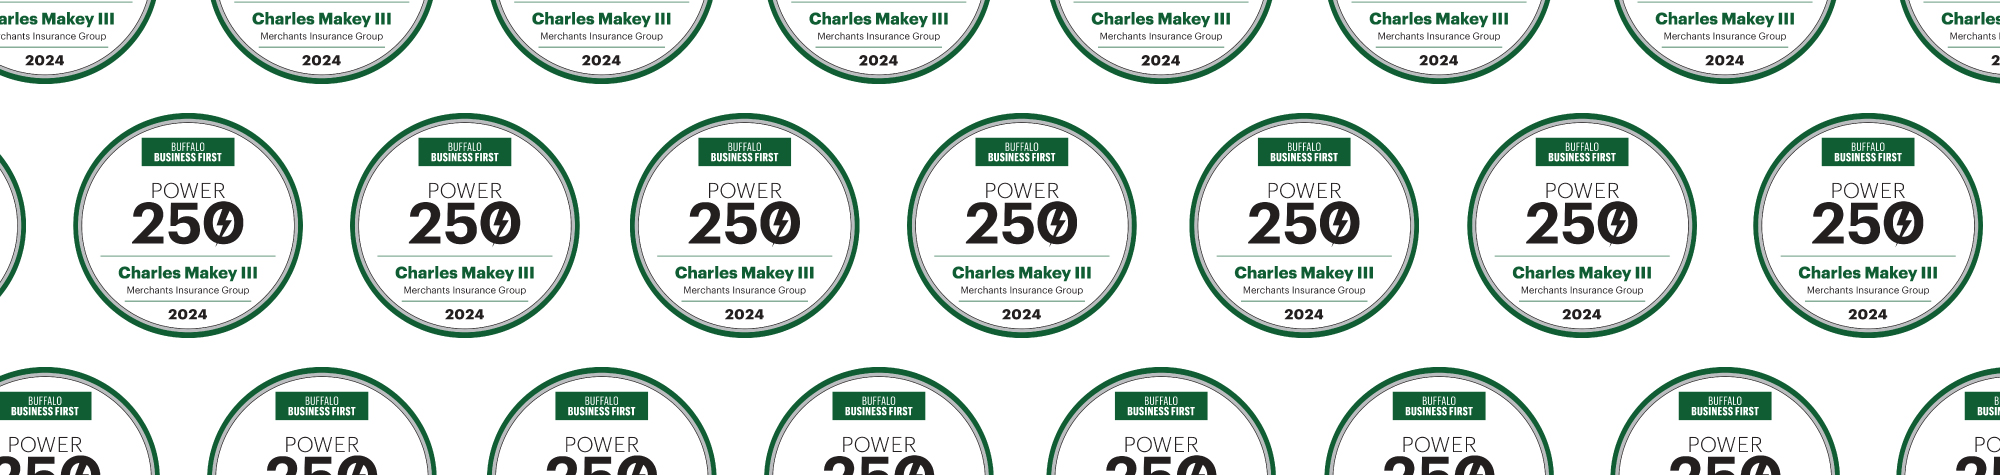 Merchants Insurance Group President and Chief Executive Officer Charles E. Makey, III, Named to Buffalo Business First’s Power 250 List for Third Consecutive Year